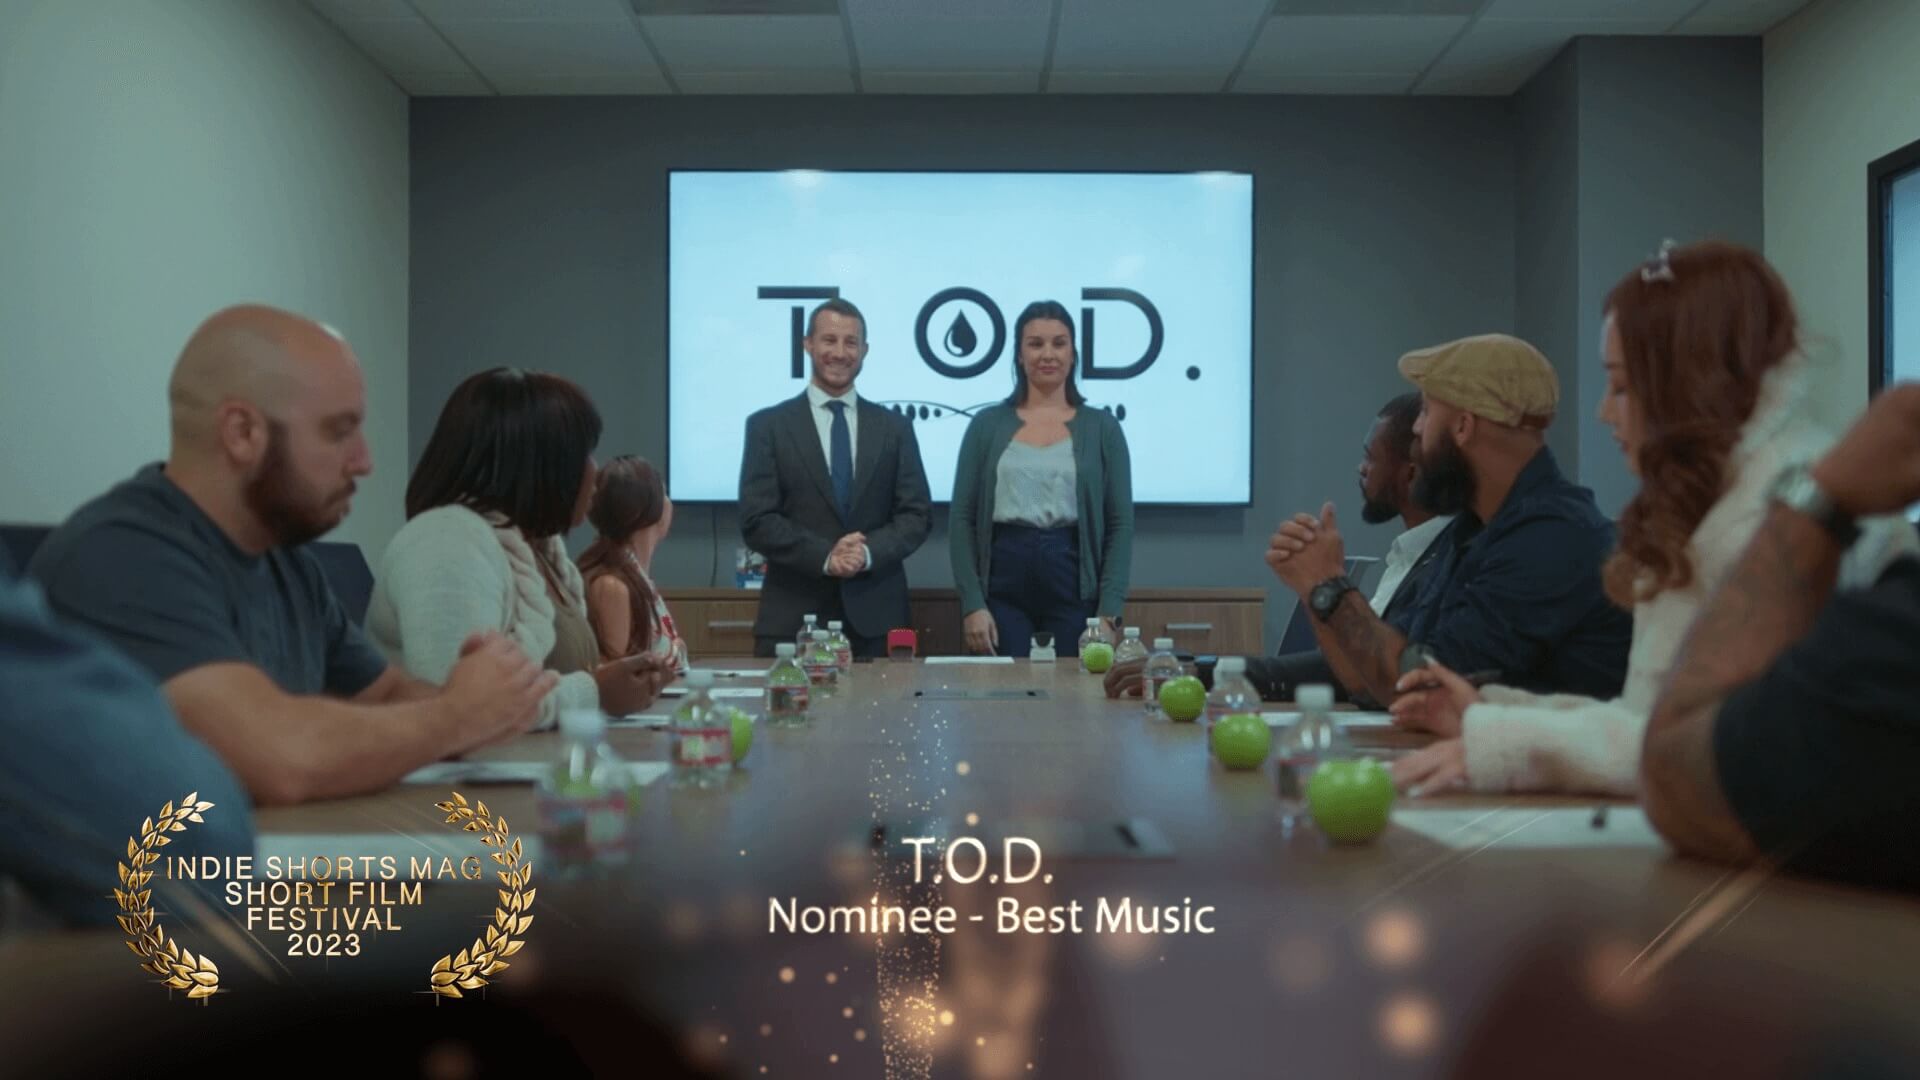 Indie Shorts Mag Short Film Festival - Best Music - Nominee - TOD